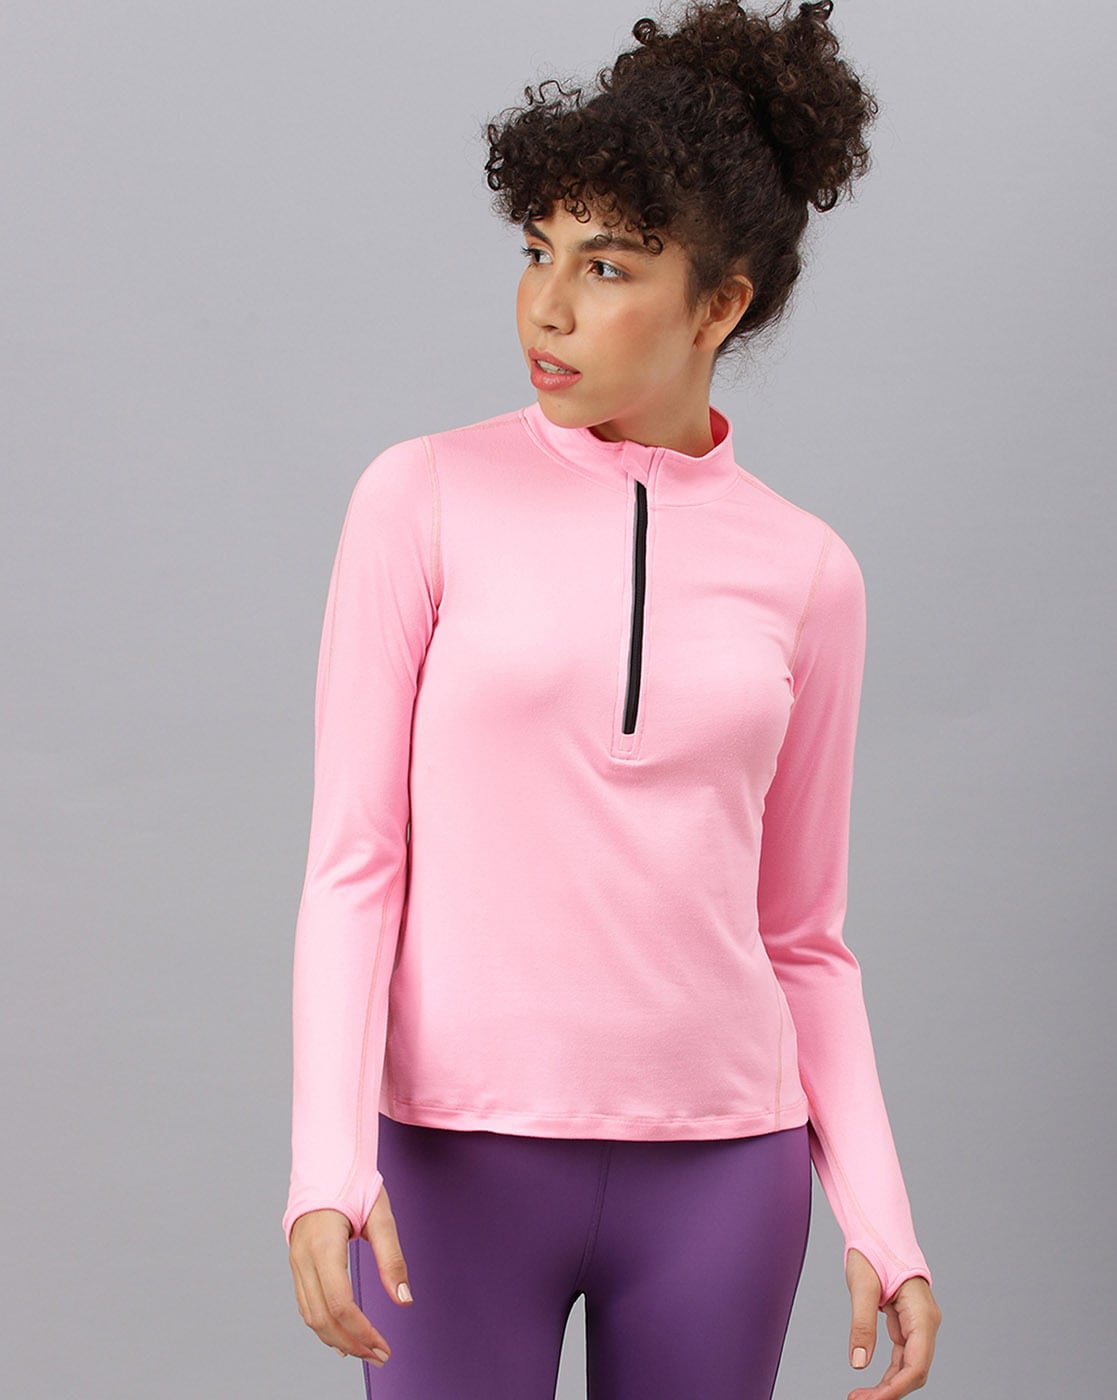 Buy Pink Tshirts for Women by FITKIN Online